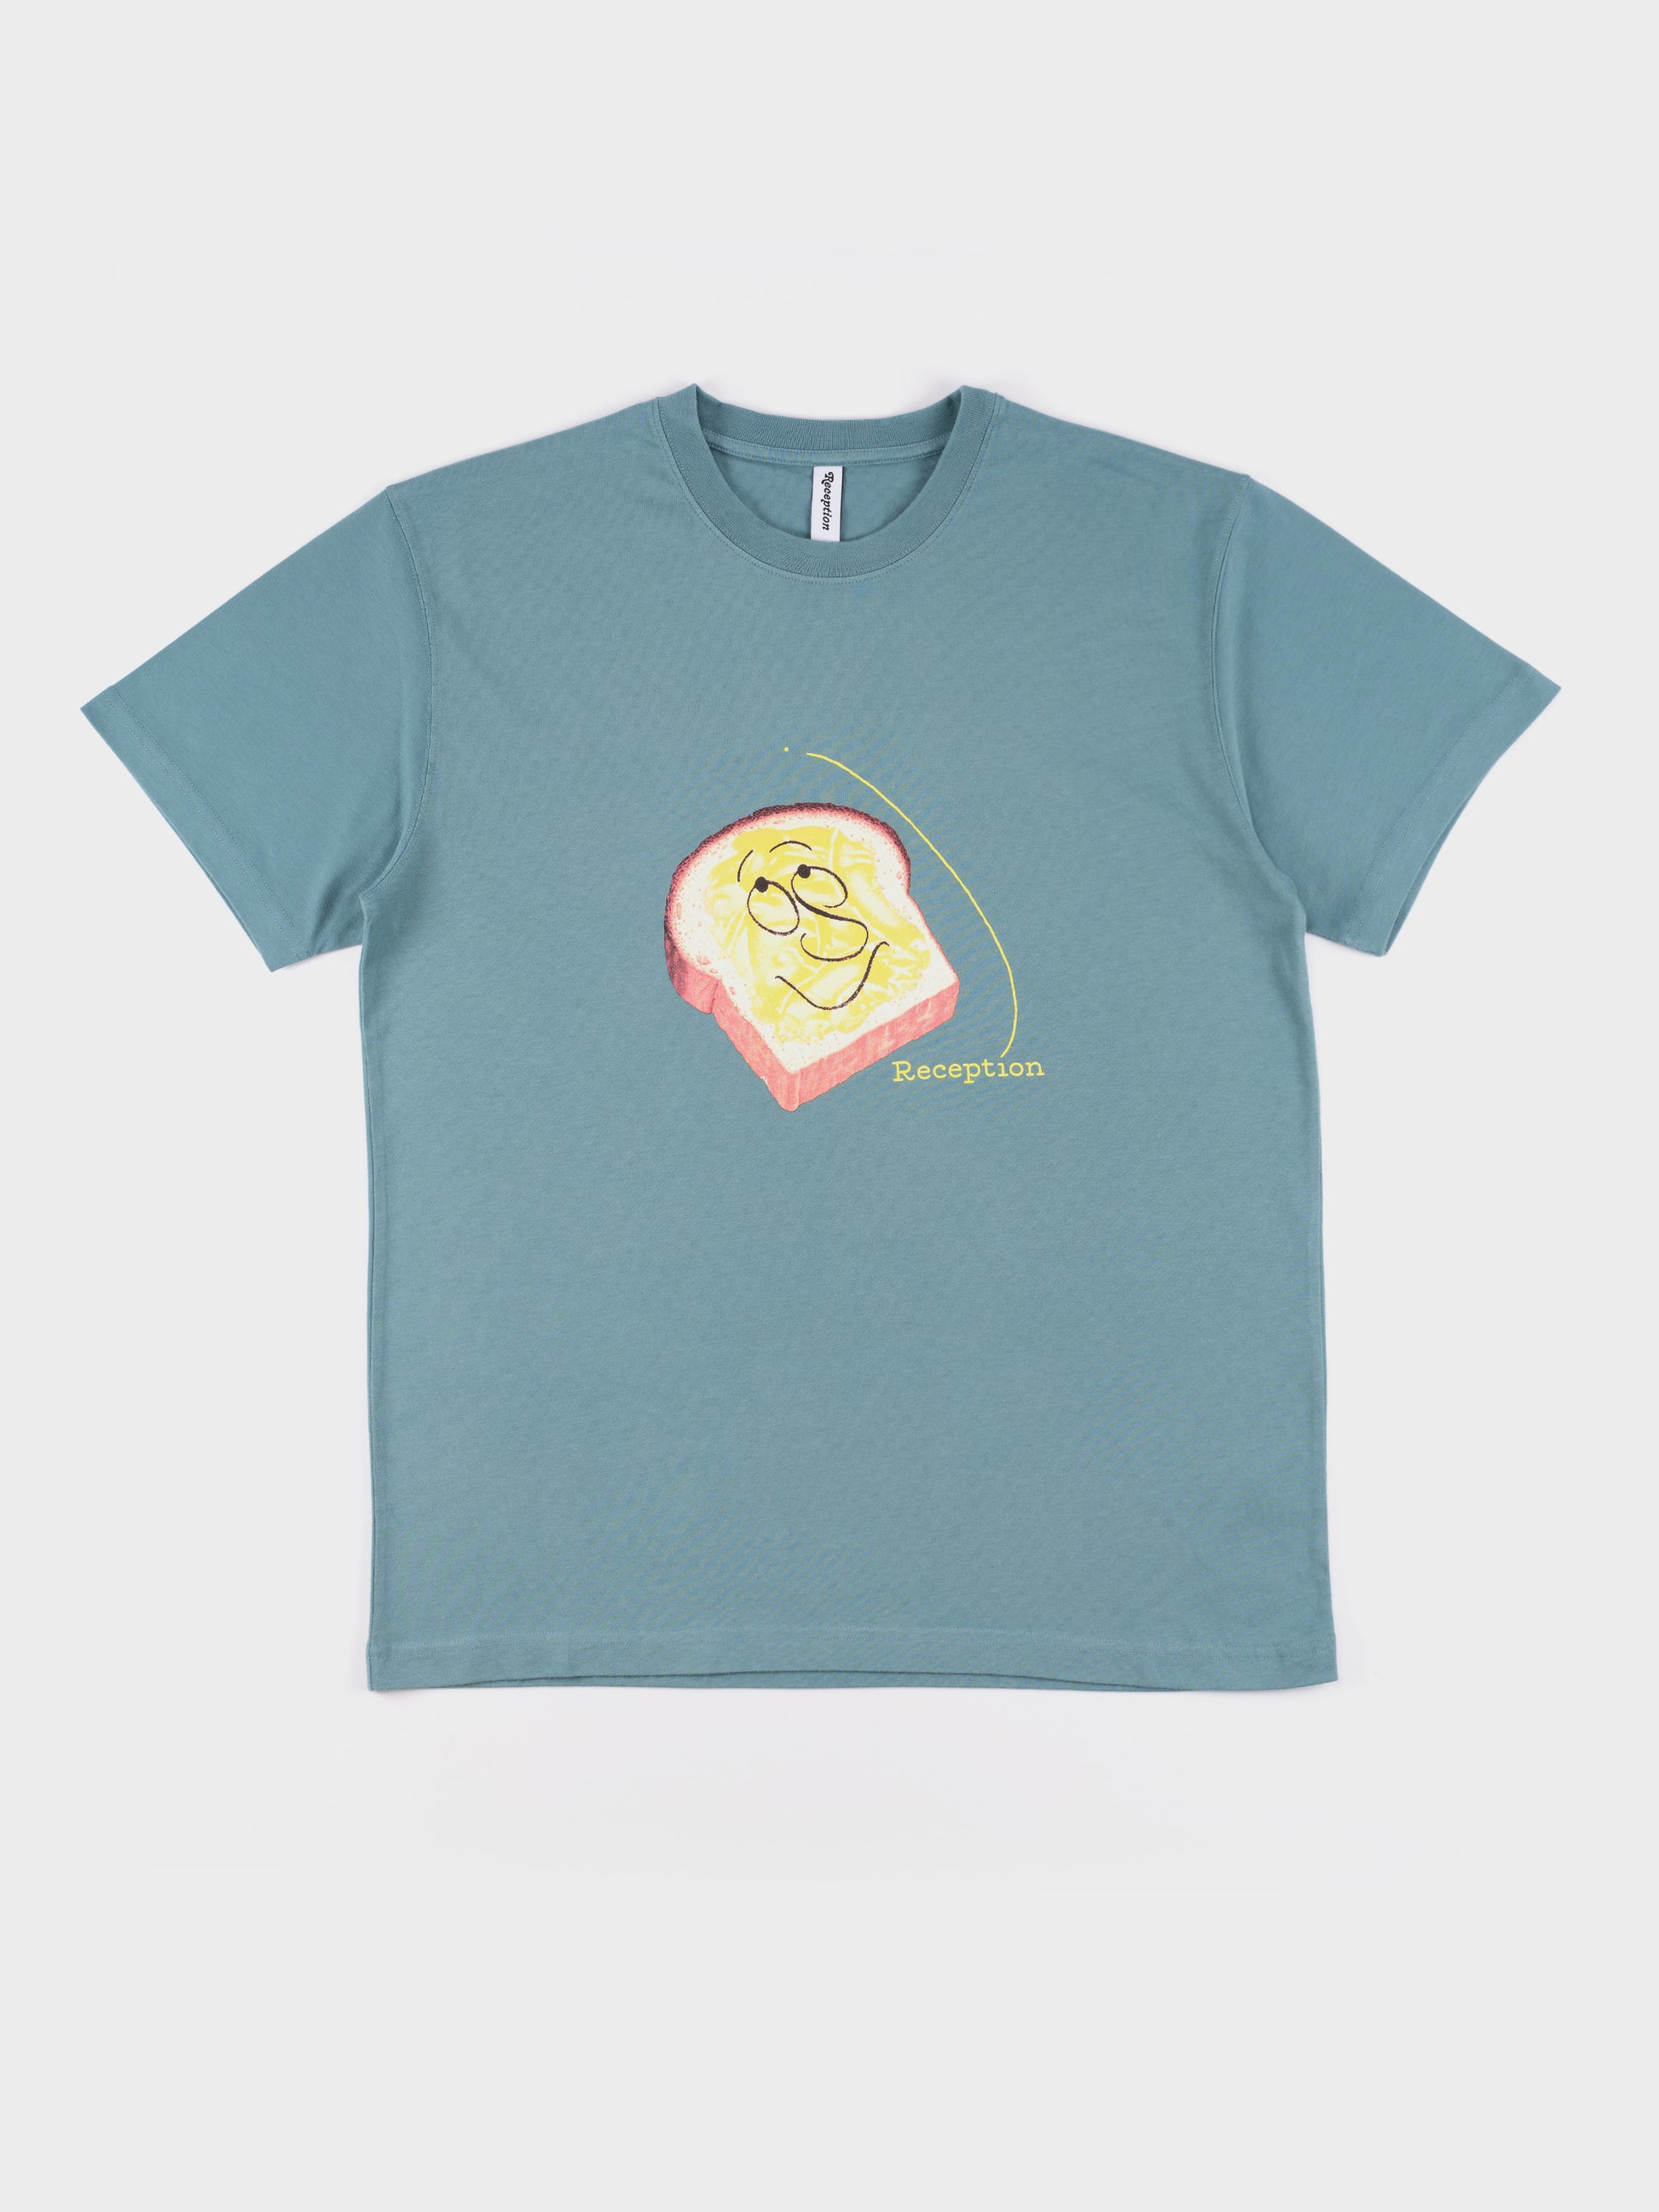 Reception Toasted SS T Shirt - Dusty Green